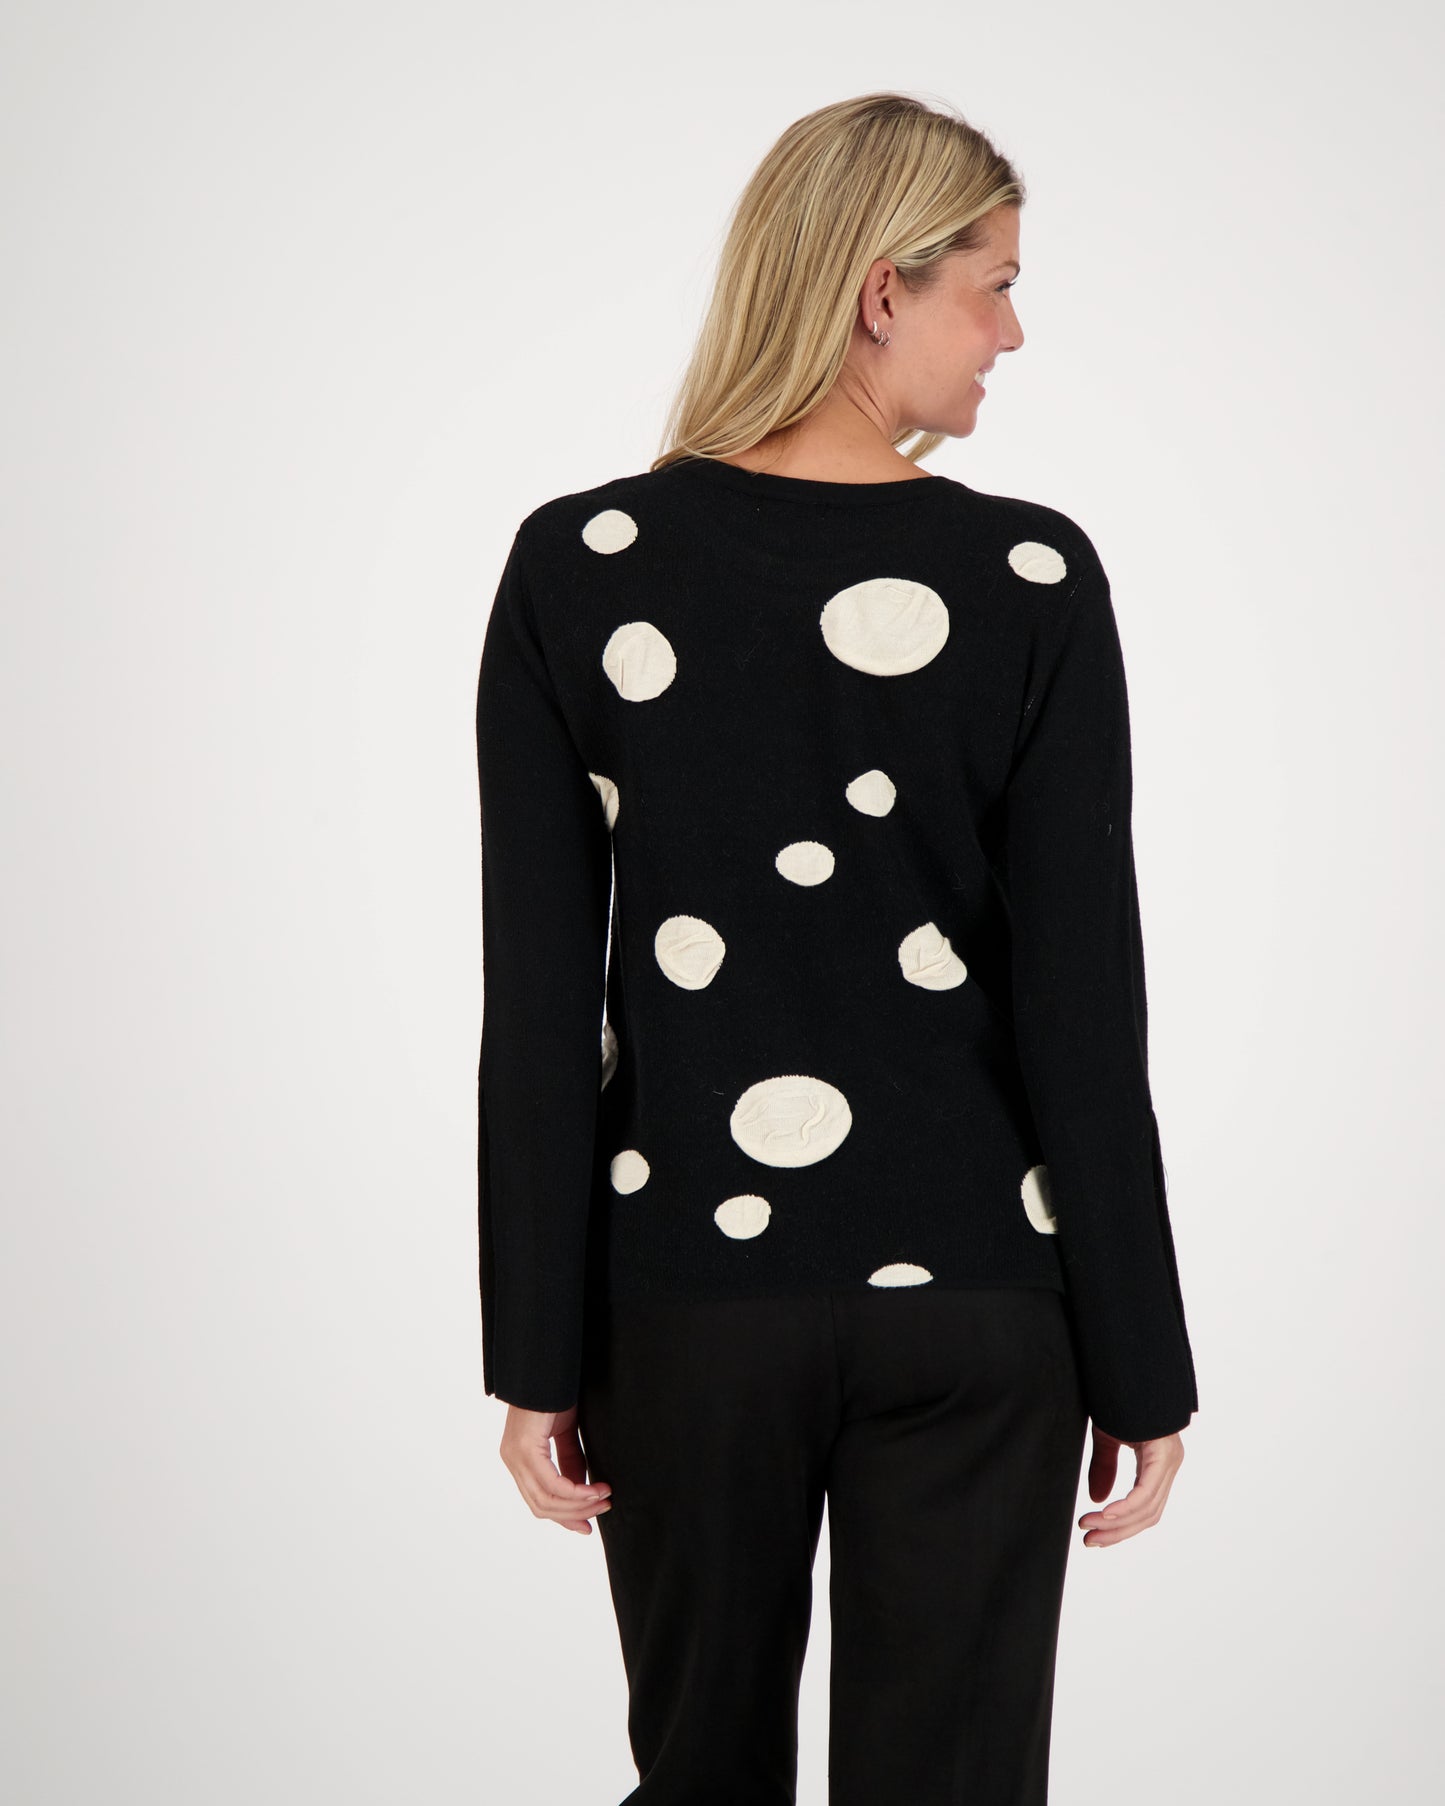 Silver Dots Sweater